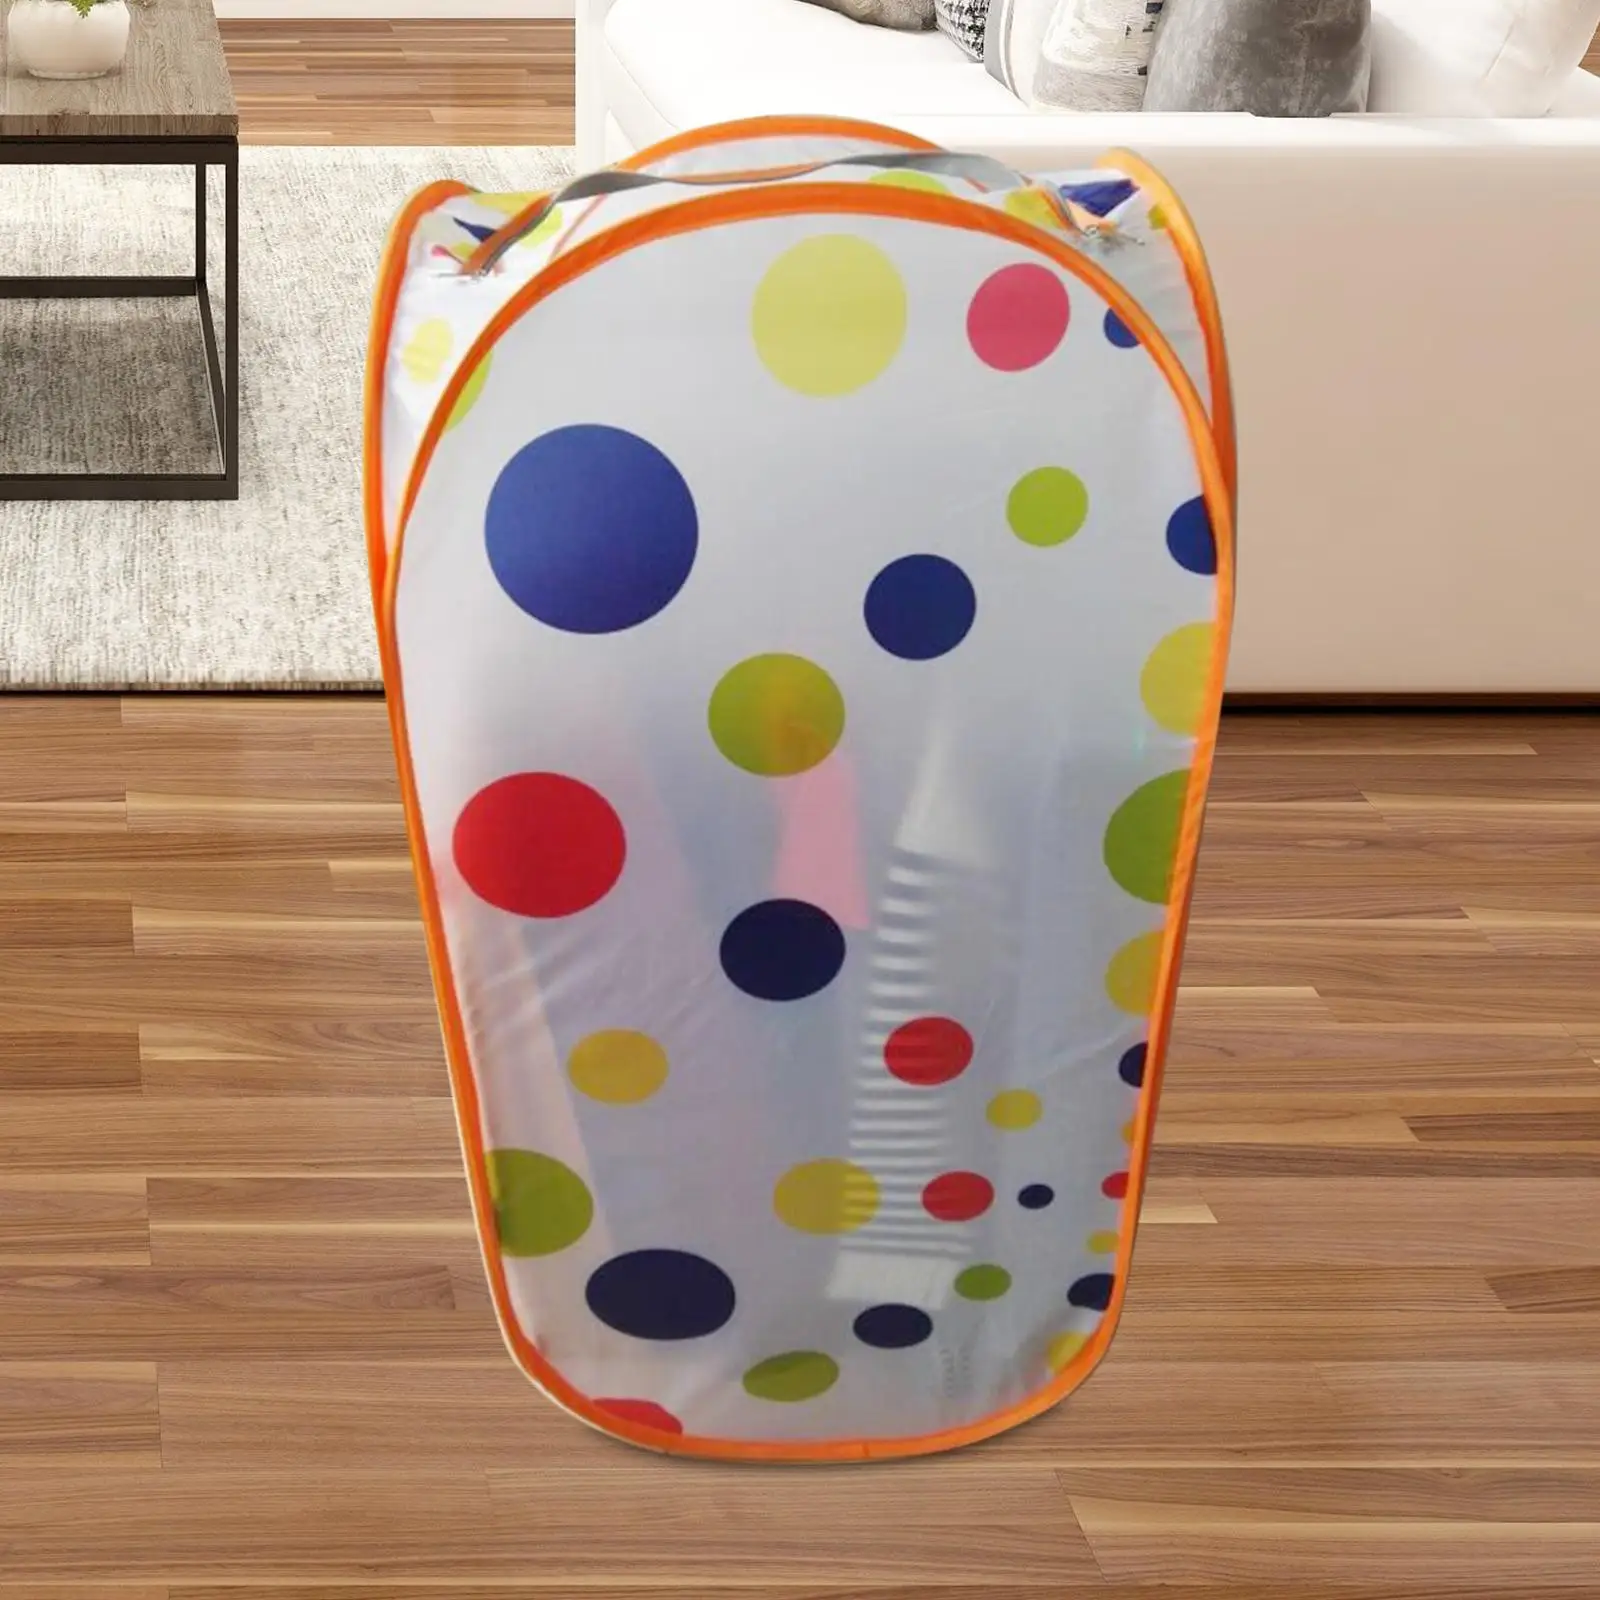 Large Capacity Clothes Dryer Portable Travel Mini Clothing Dryer Energy Saving Collapsible Drying Machine for Household Laundry